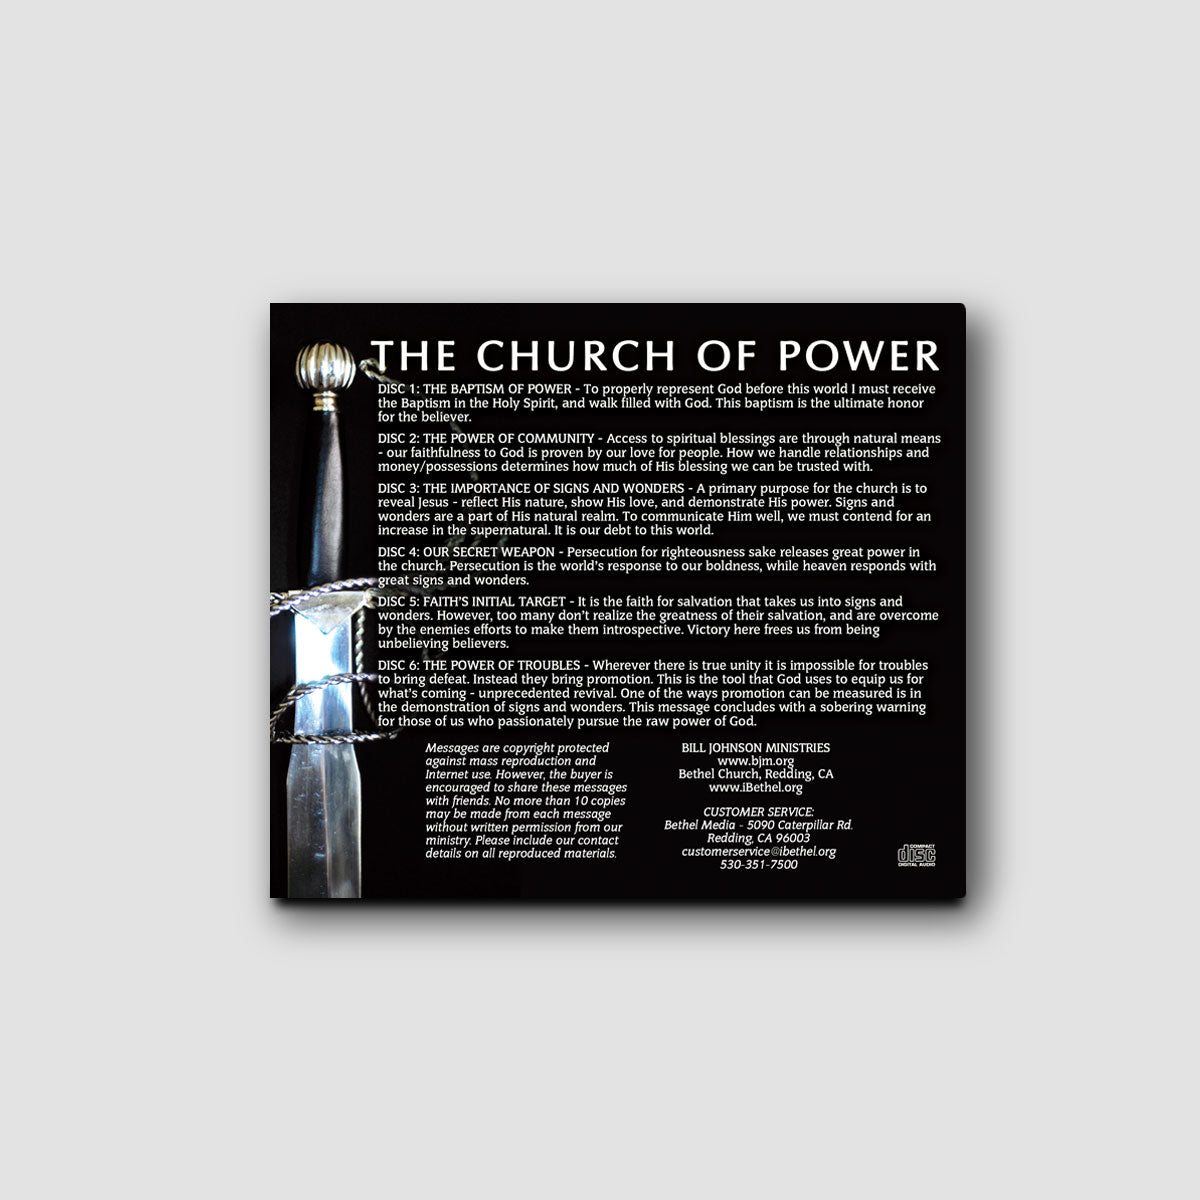 The Church of Power